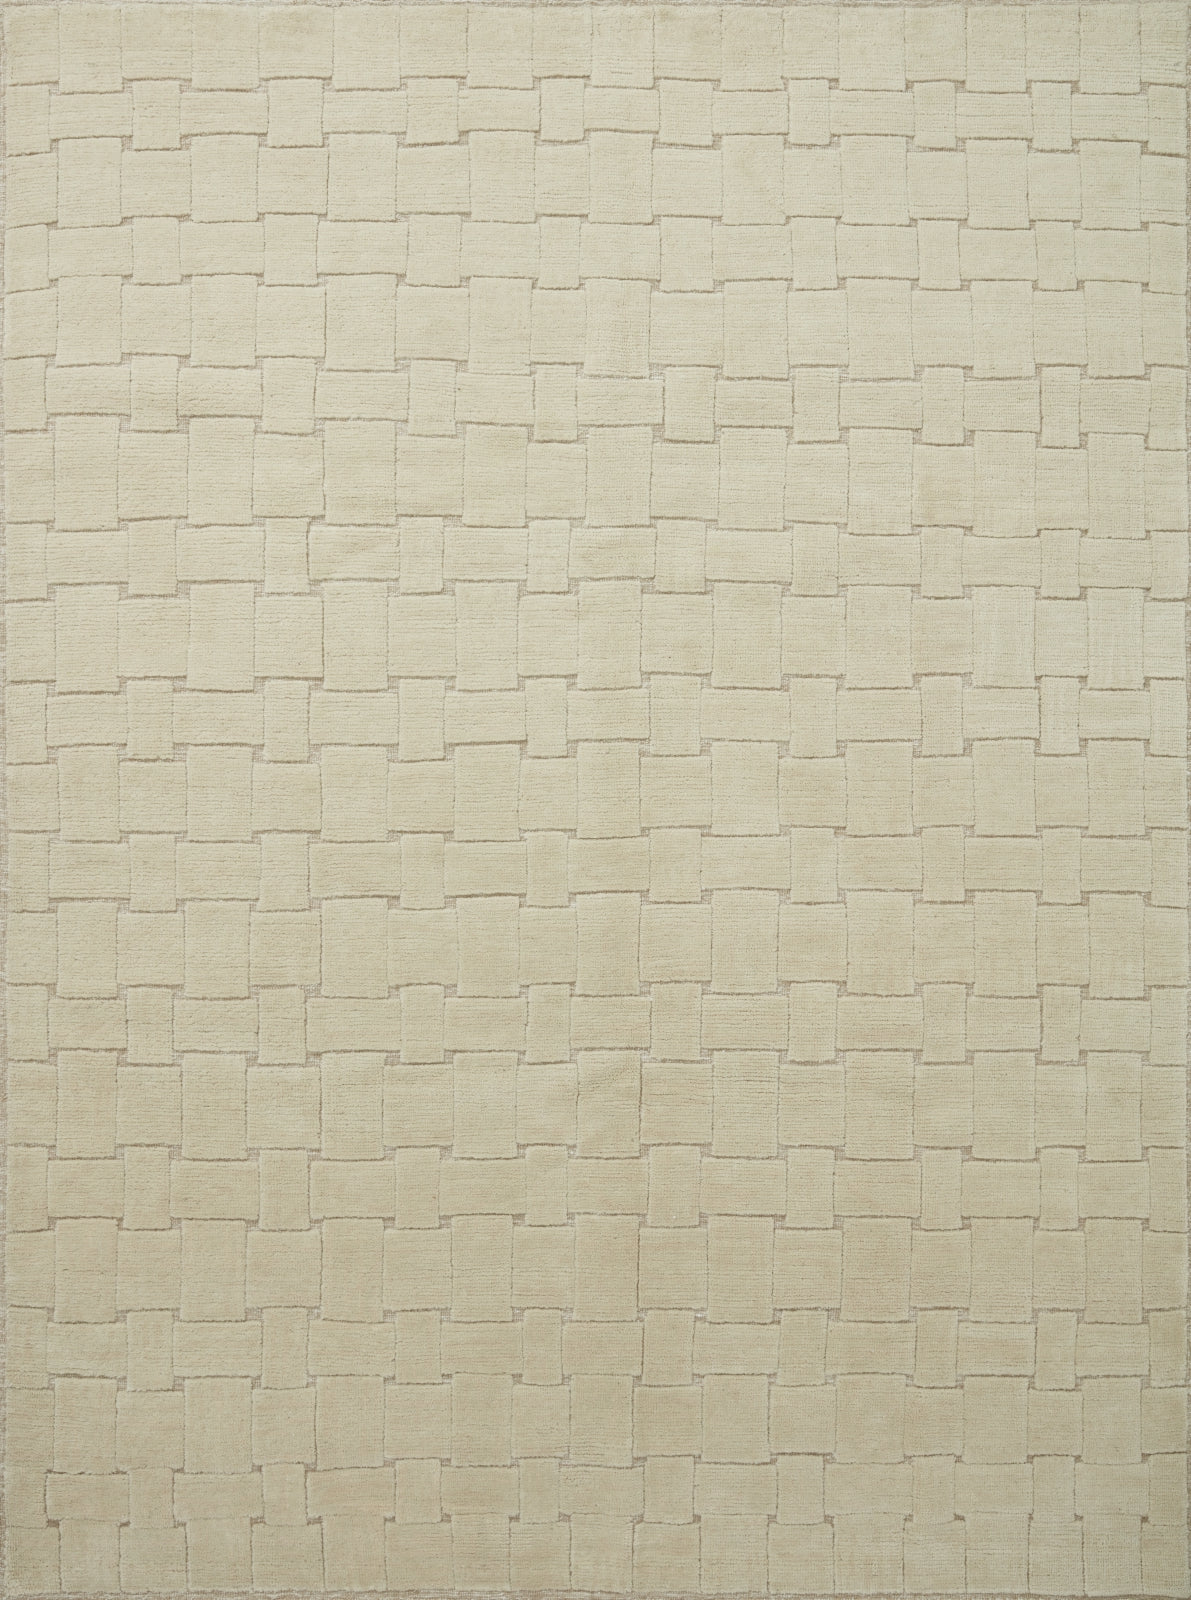 Loloi Harrison HAR-04 Beige/Natural Area Rug by Carrier and Company